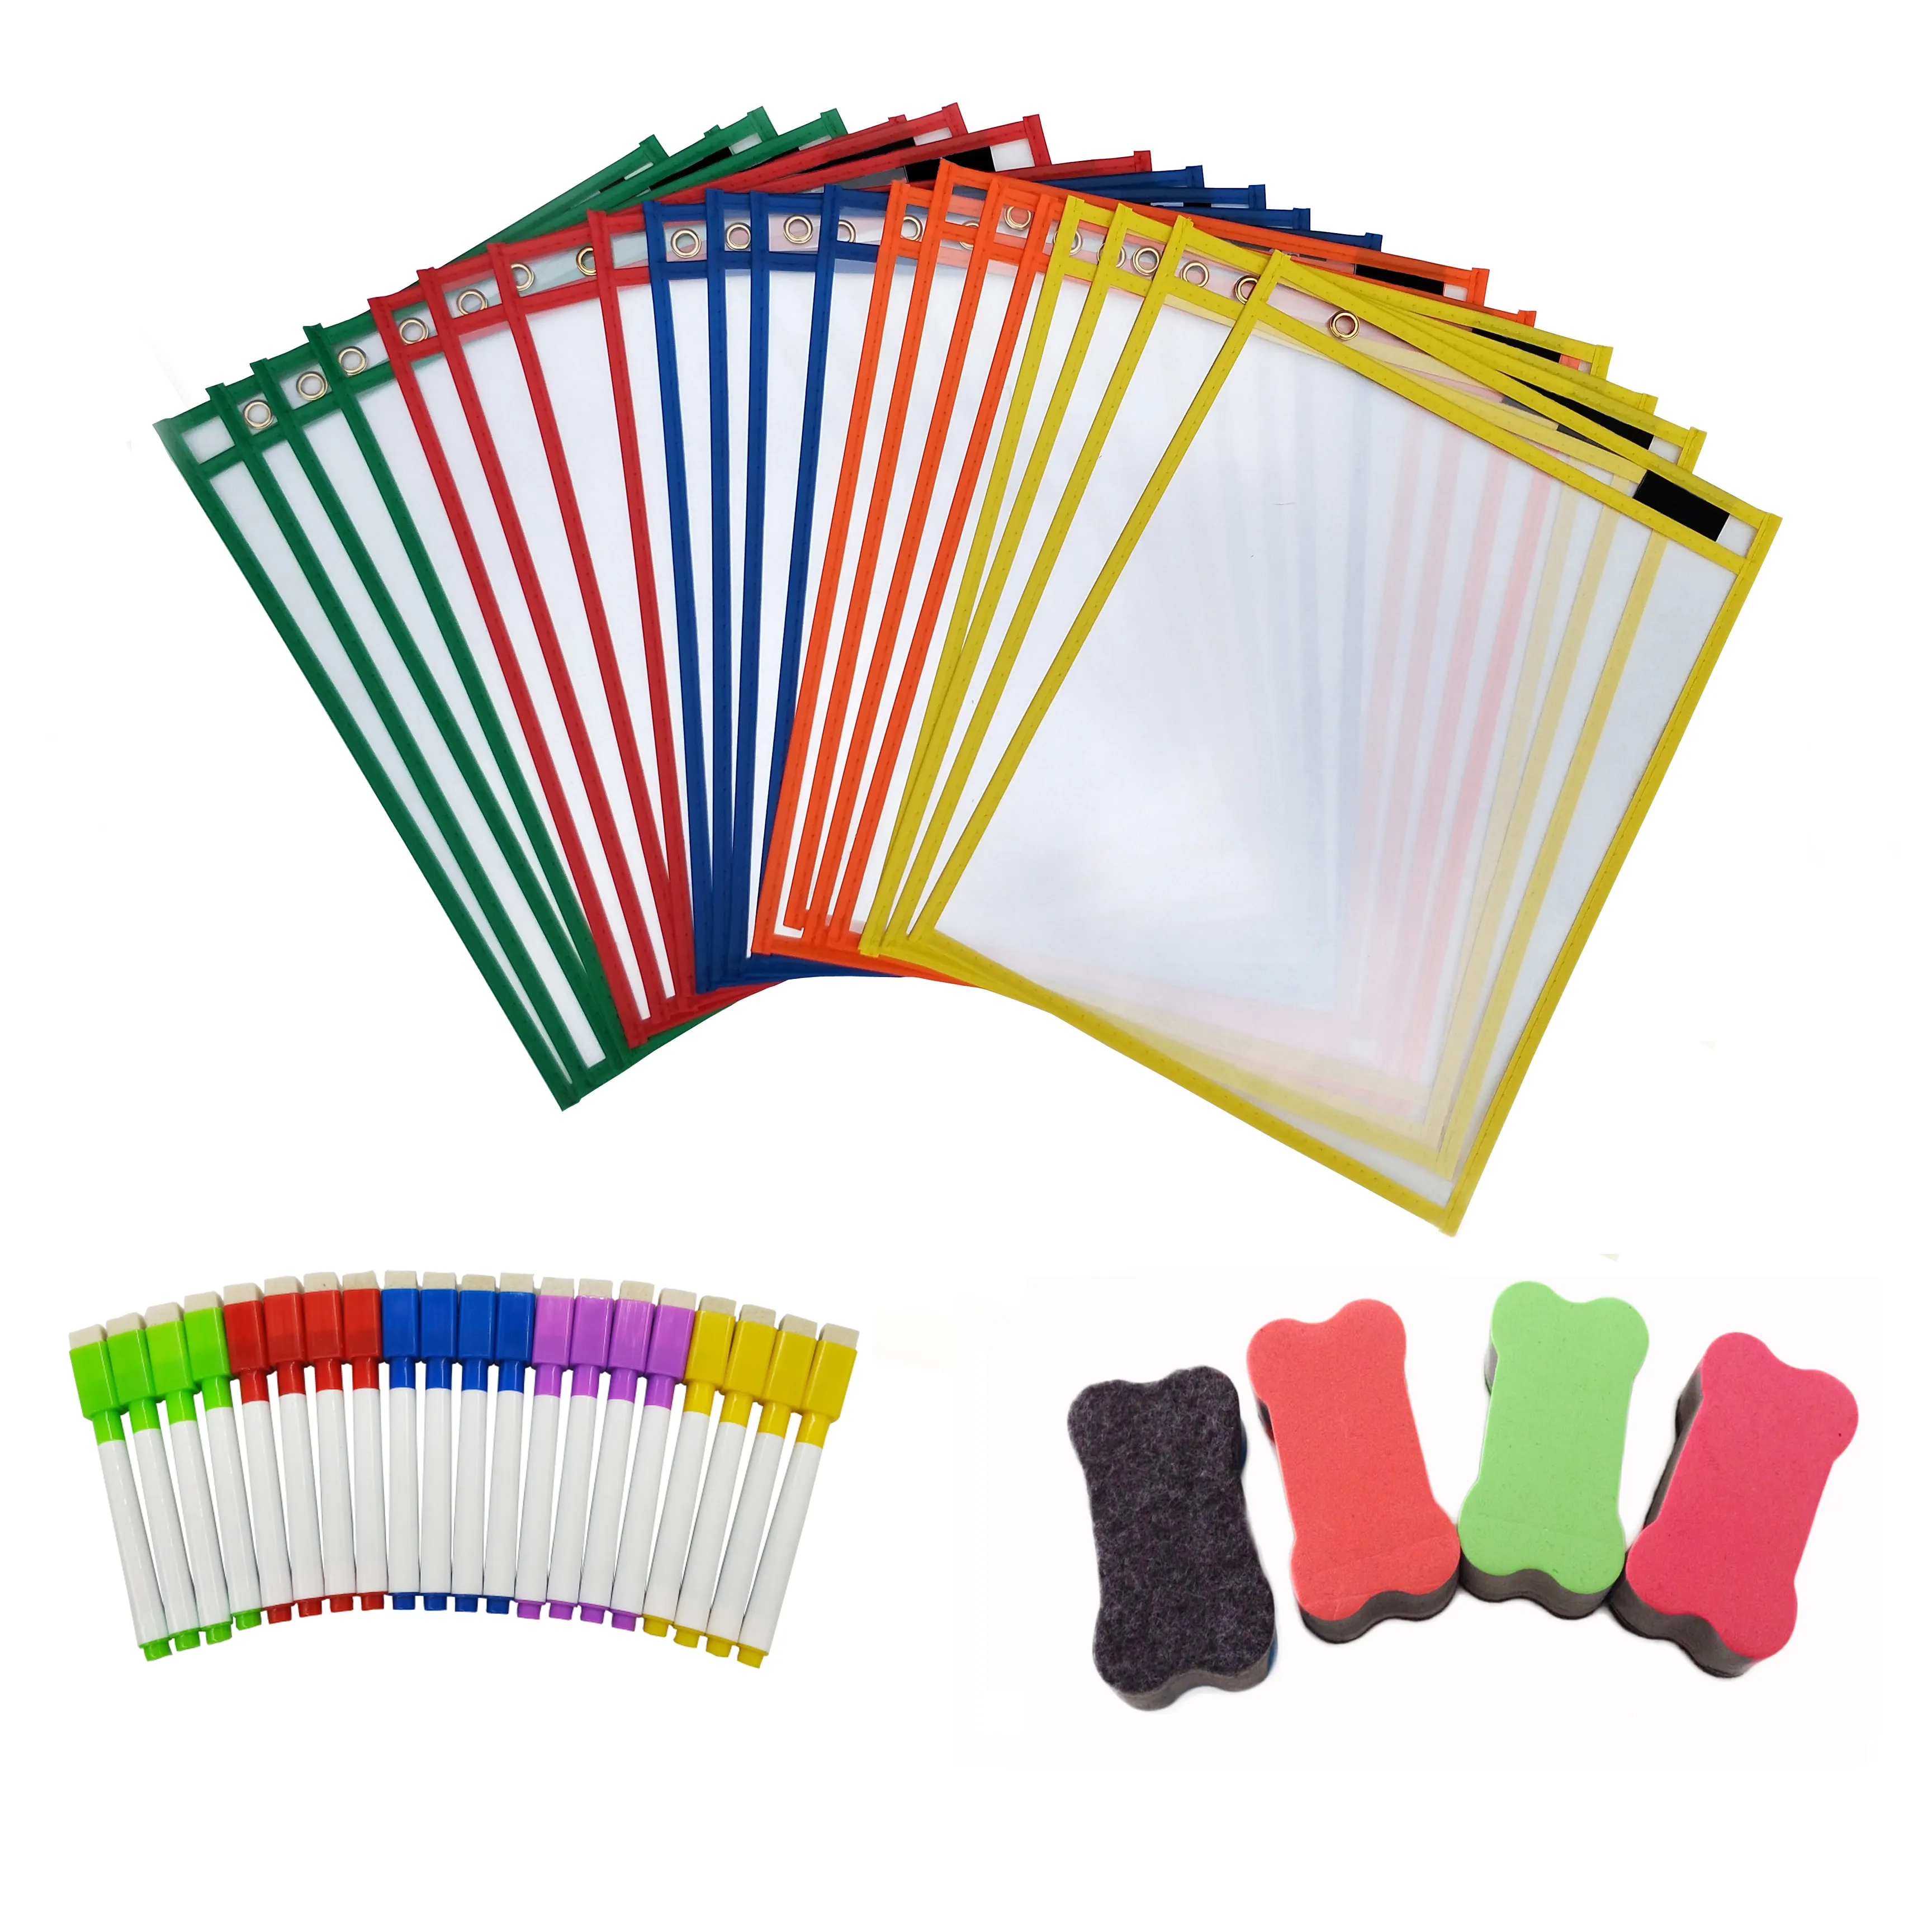 Multicolored Dry Erase Pockets Oversize 10'' x 13'' Pockets Perfect for Classroom Organization, Teaching Supplies 20pcs Per Pack